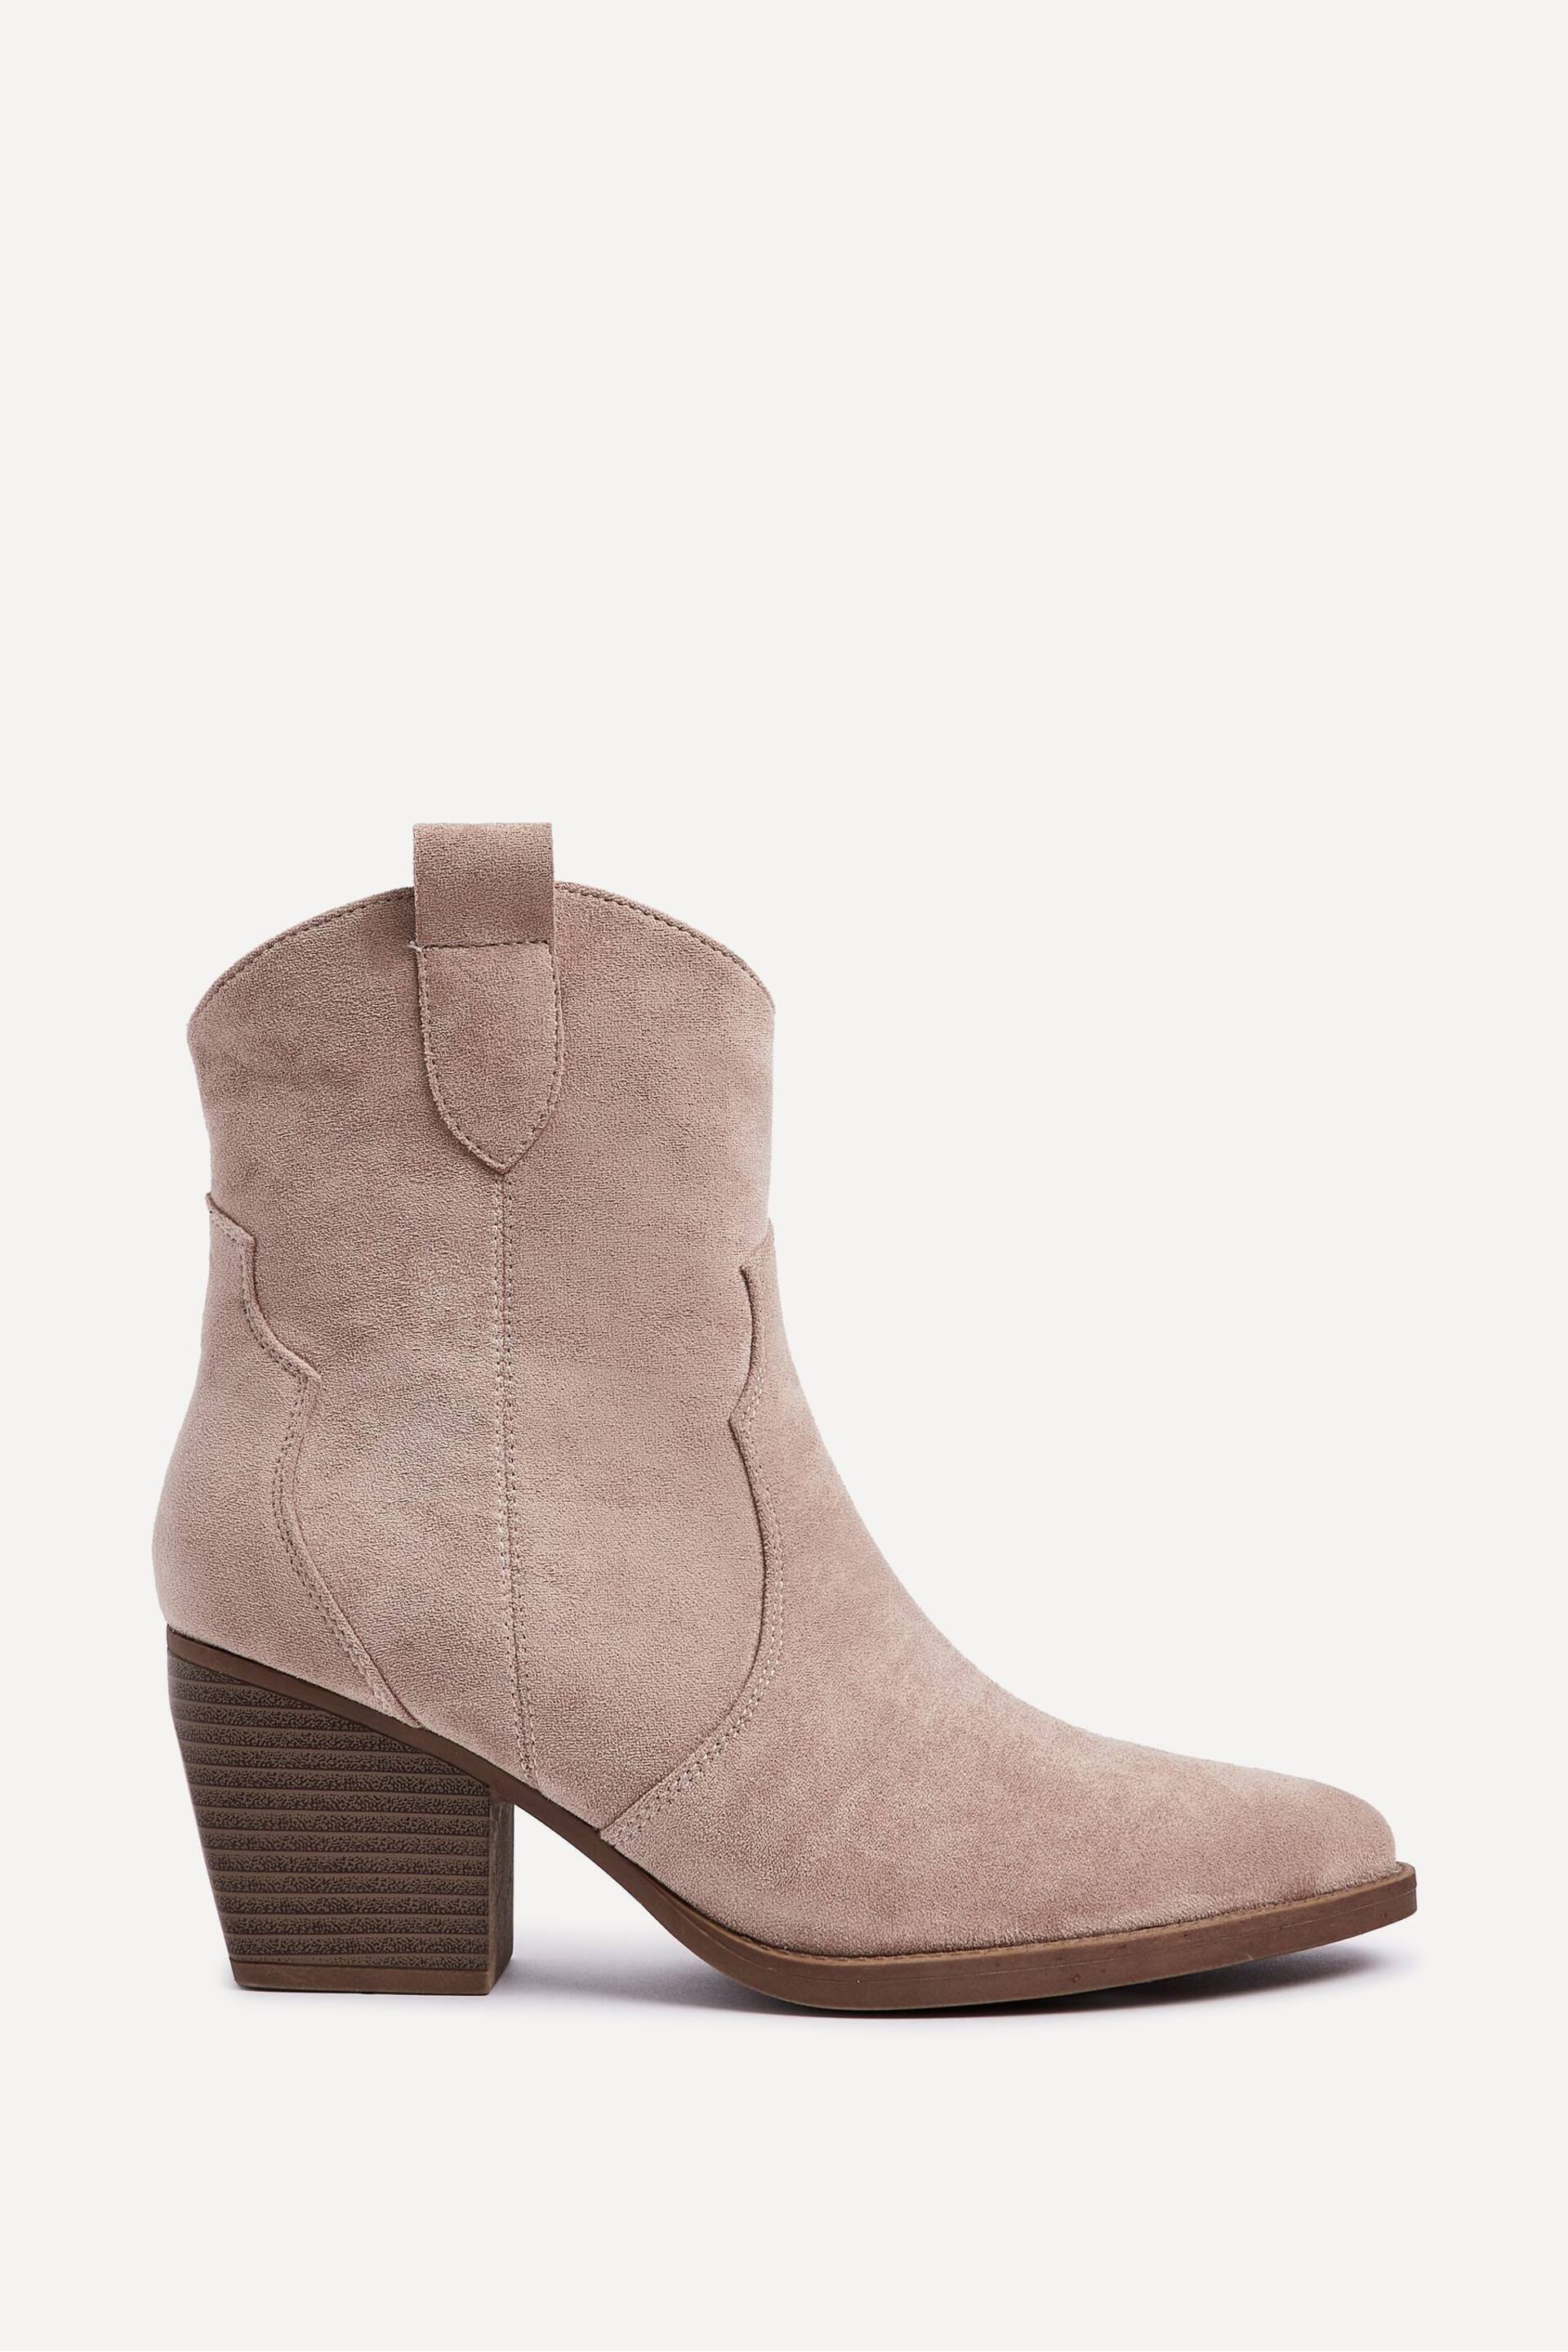 Linzi Natural Jessie Suede Western Ankle Boots - Image 2 of 5